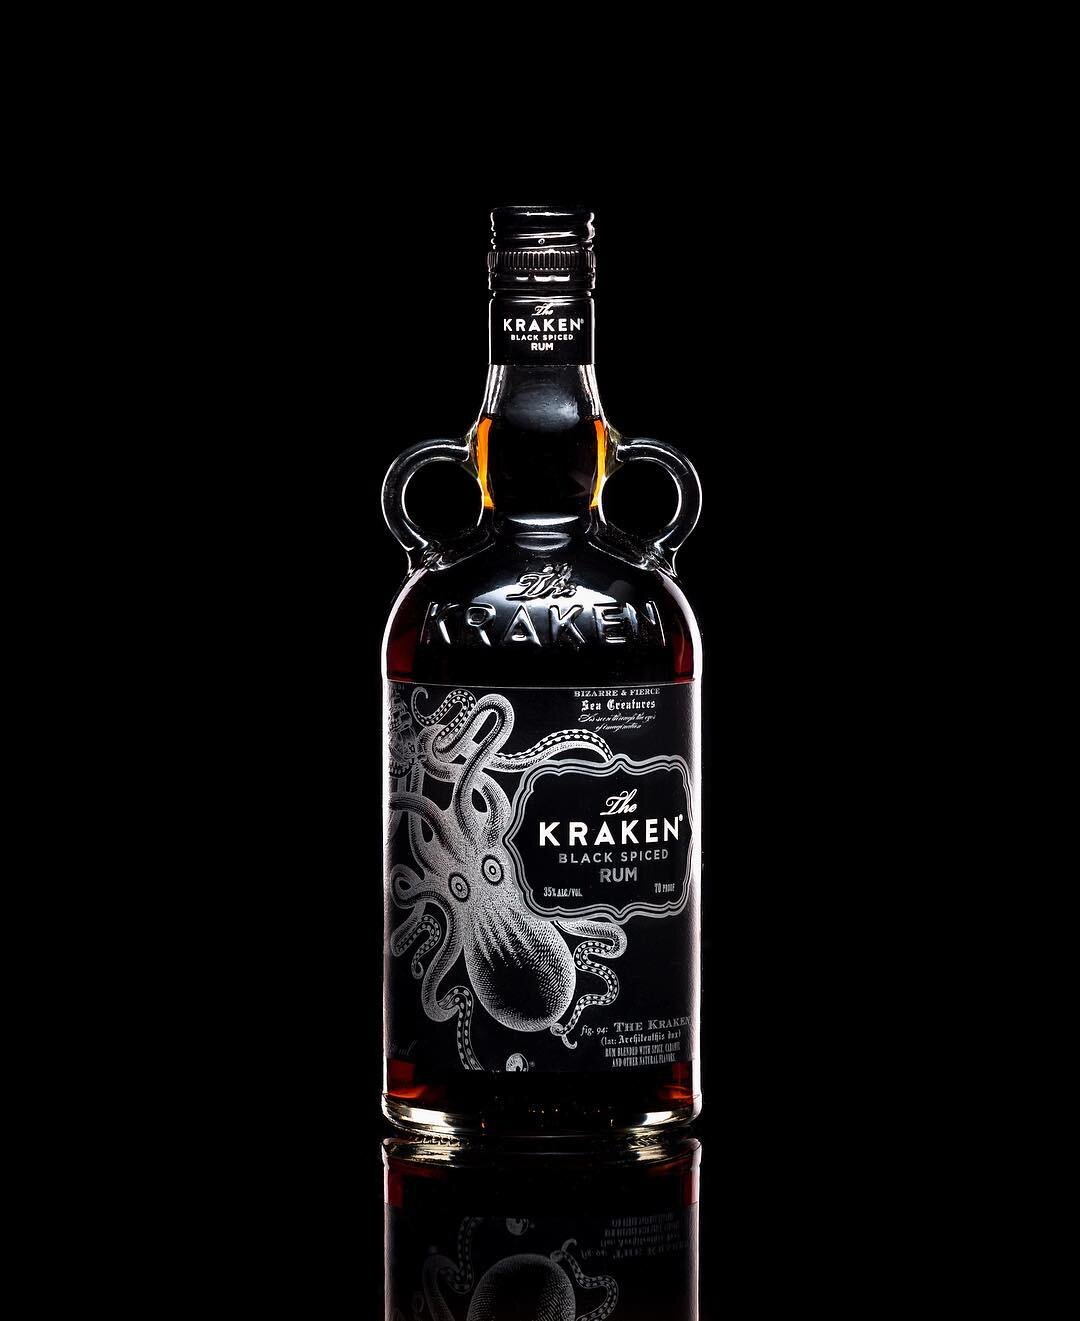 ◾️Release The Kraken◾️ #ProductPhotography tribute to @KrakenRum and its gorgeous bottle design.